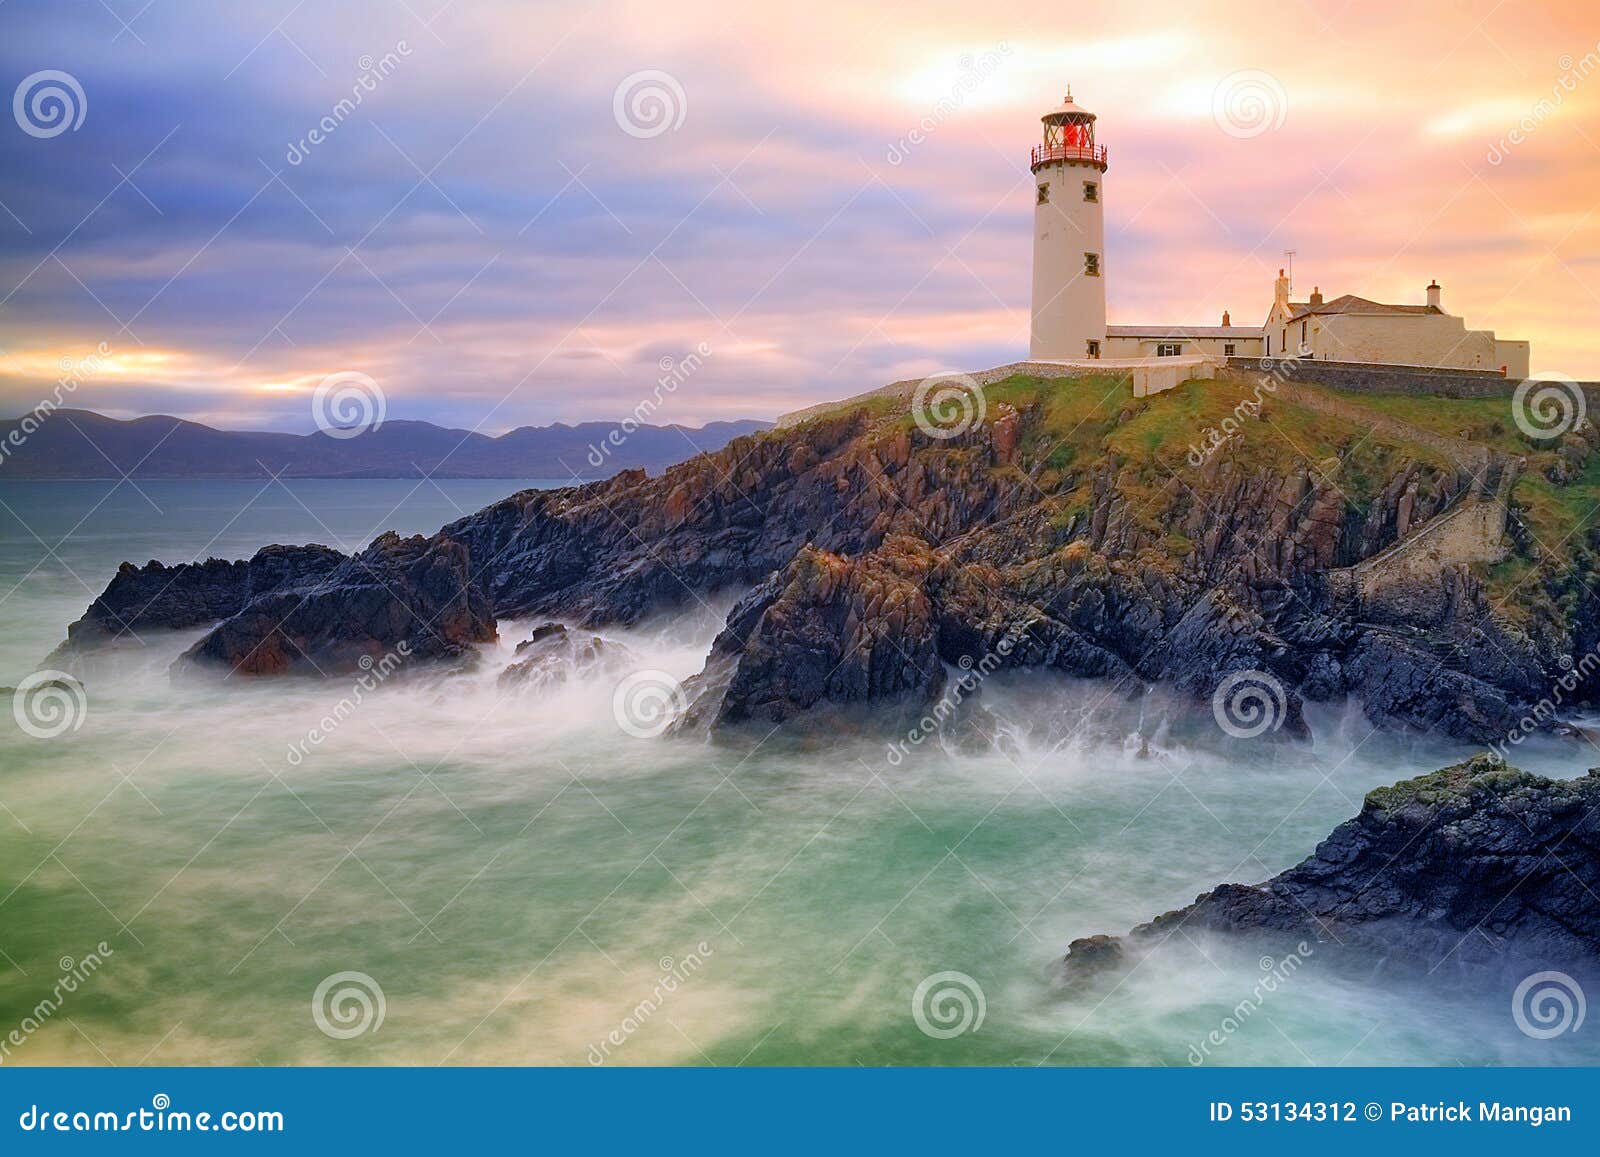 fanad lighthouse, co. donegal, ireland